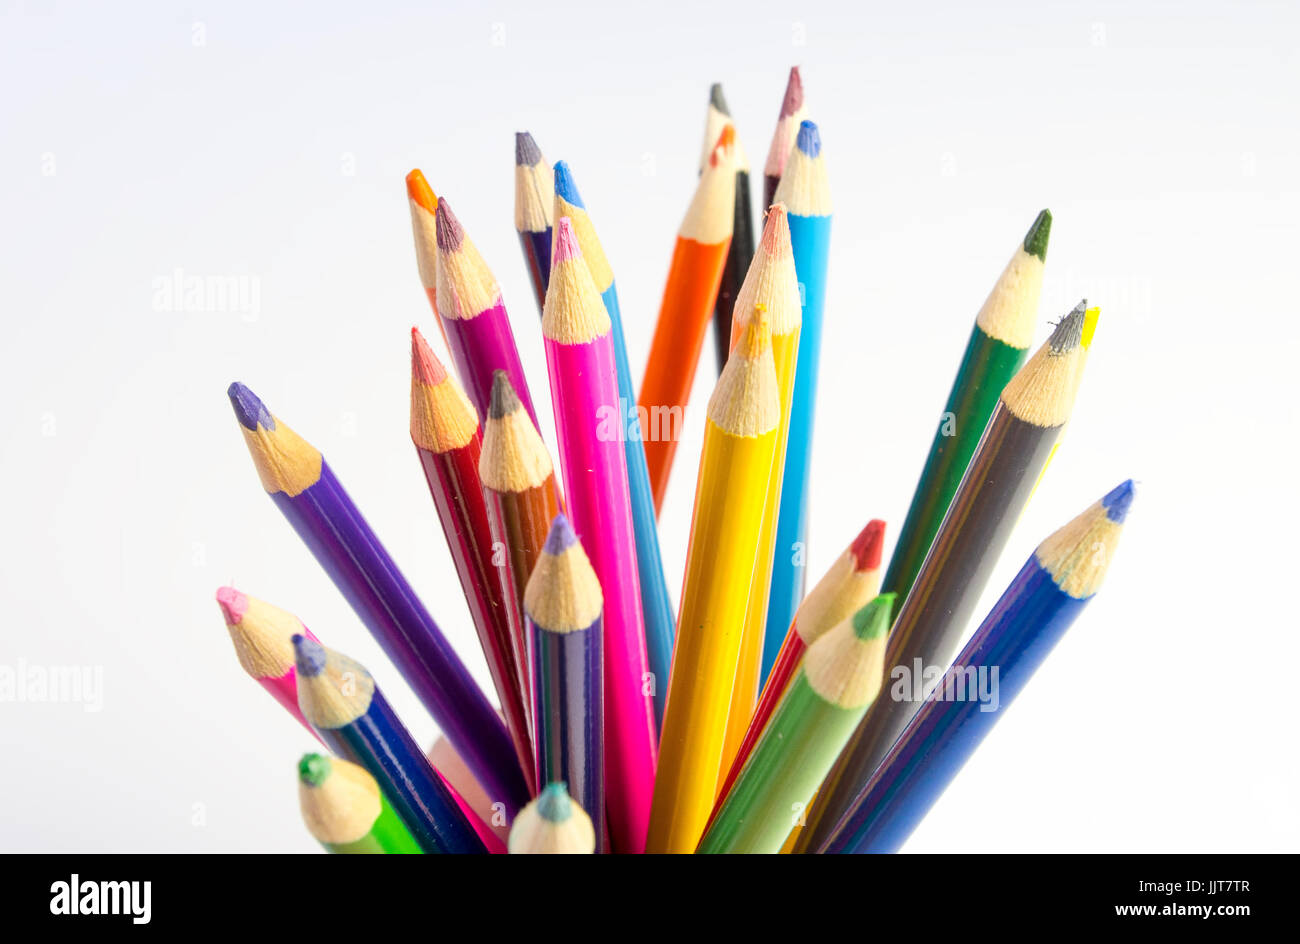 Group of colored pencils with sharpened ends up Stock Photo